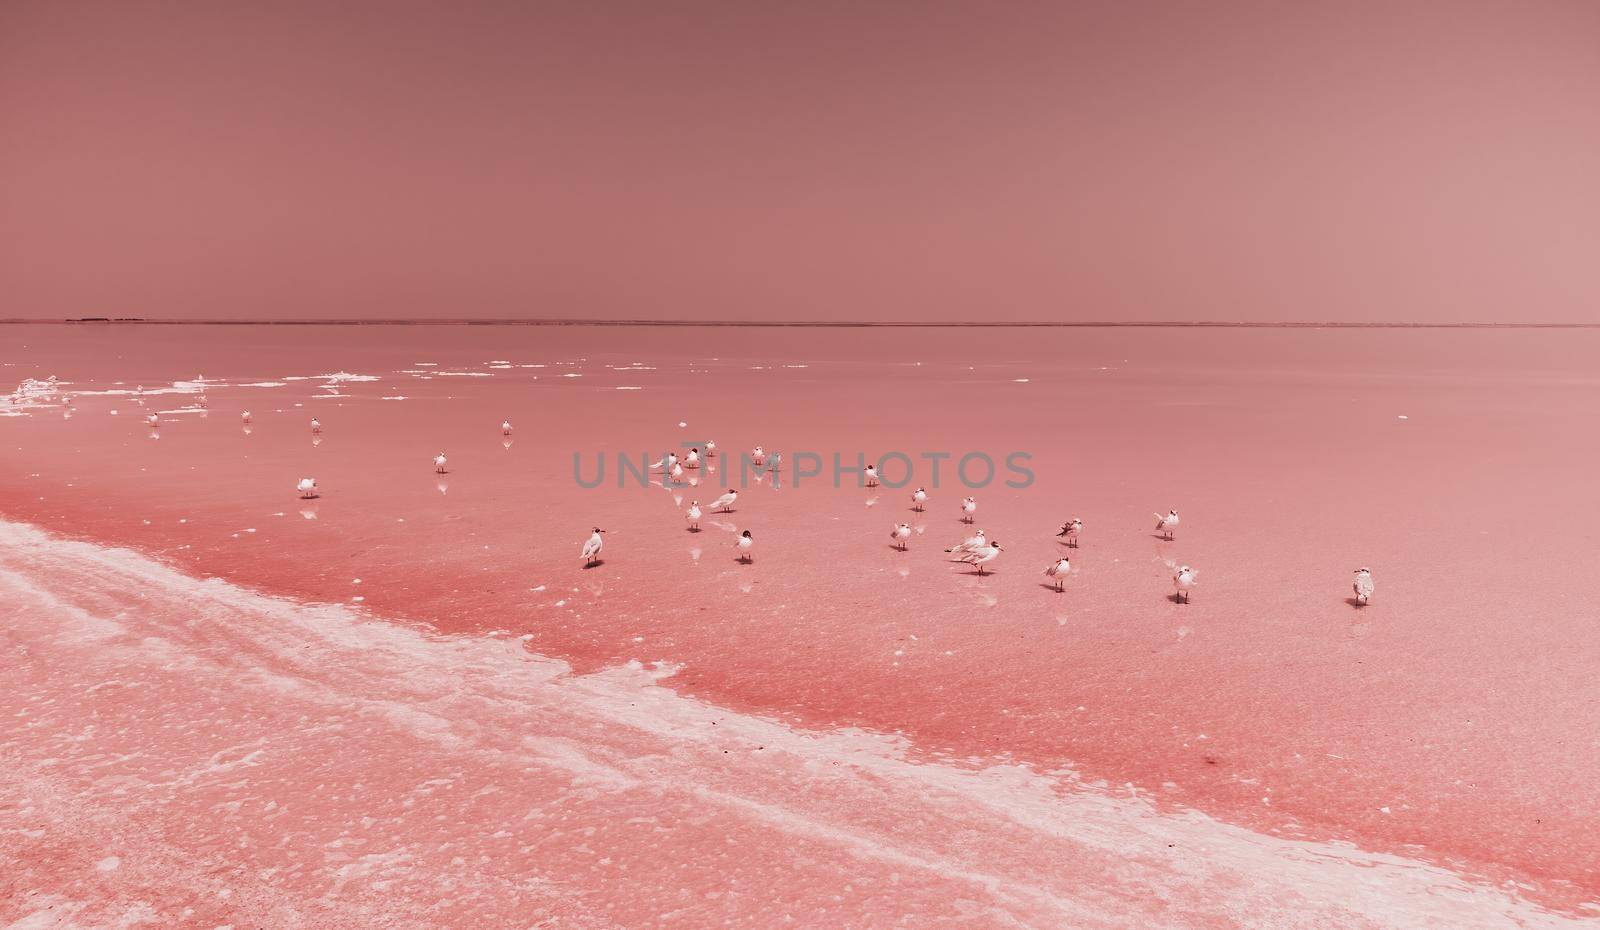 Flying over seagulls at pink salt lake. Salt production facilities saline evaporation pond in salty lake. Dunaliella salina impart a red, pink water in mineral lake with dry cristallized salty coast by panophotograph